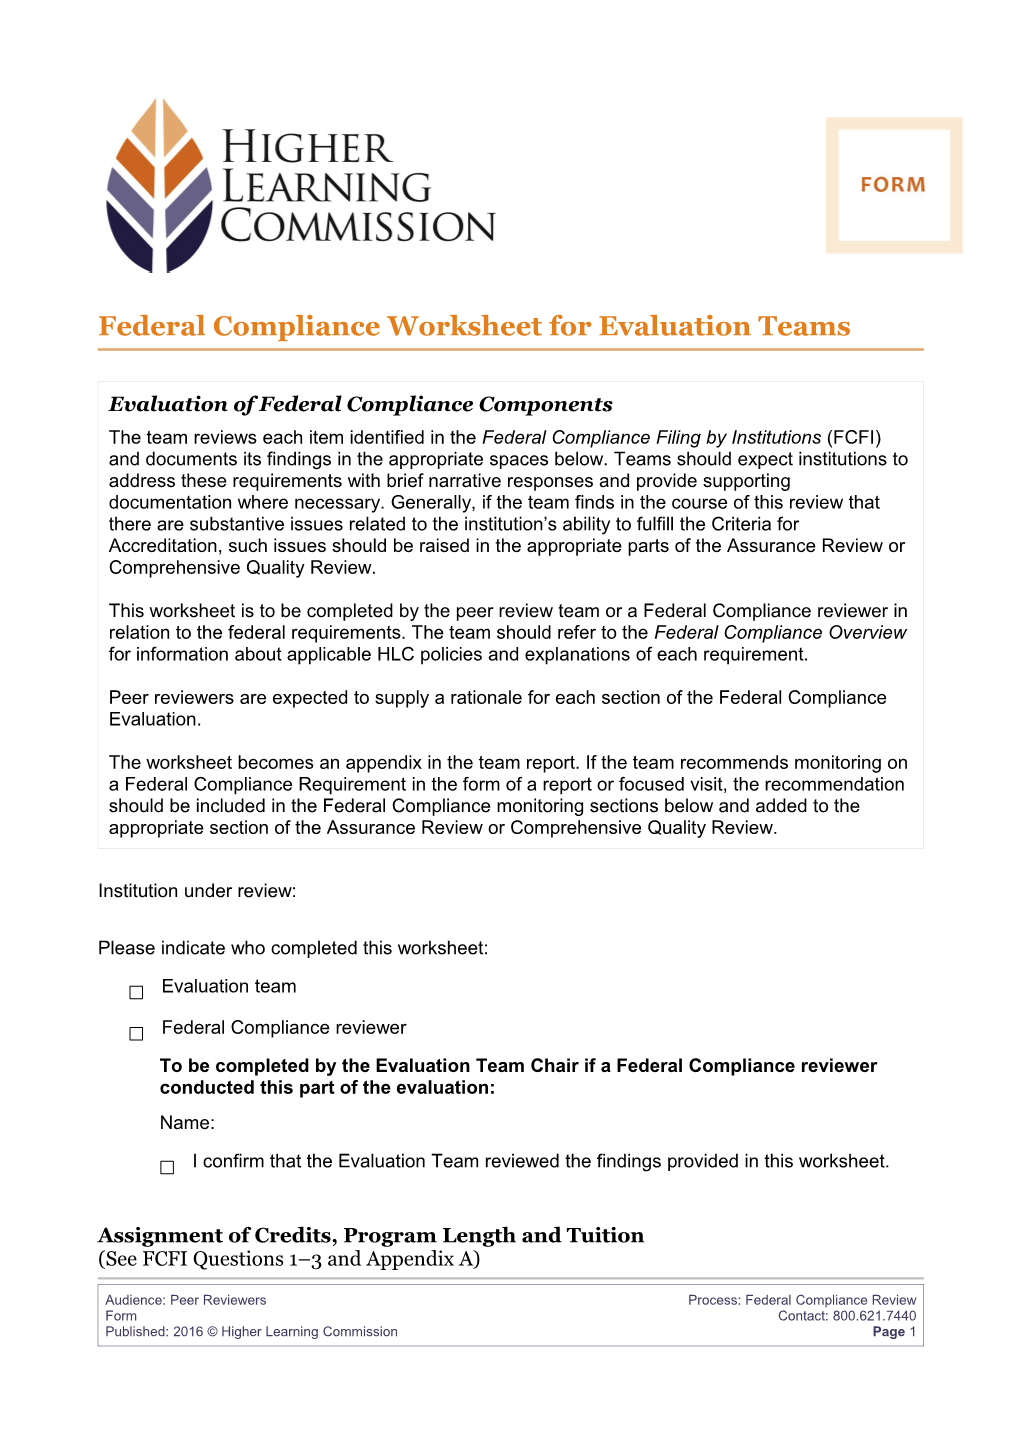 Evaluation of Federal Compliance Components